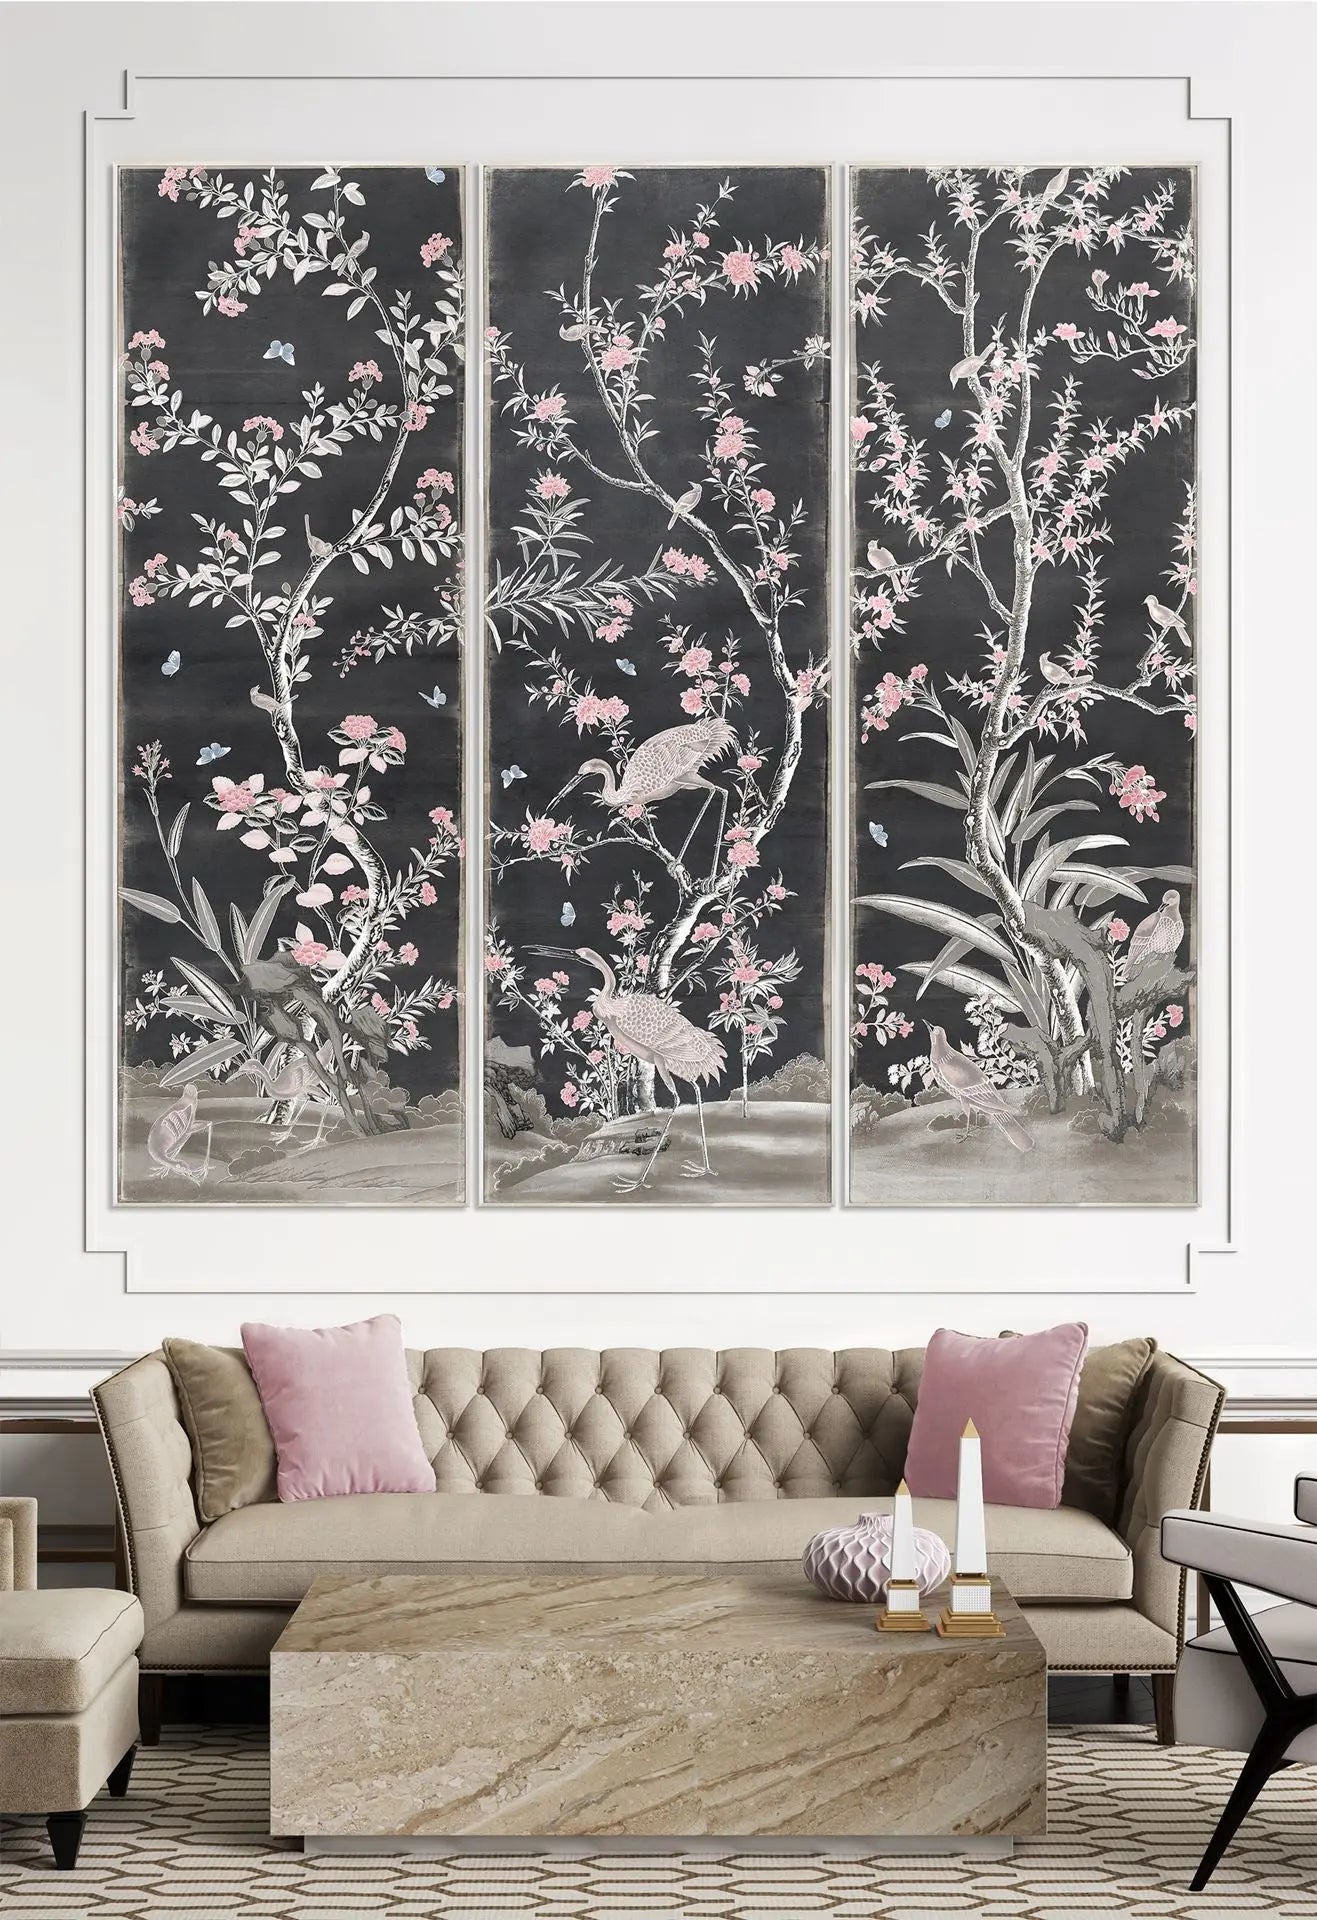 The Glory Collection Painted Furniture  Framed chinoiserie wallpaper panels  always prettyFor the perfect wallpaper call Concept Candie  Interiorswwwconceptcandiecomwallpaper  Facebook